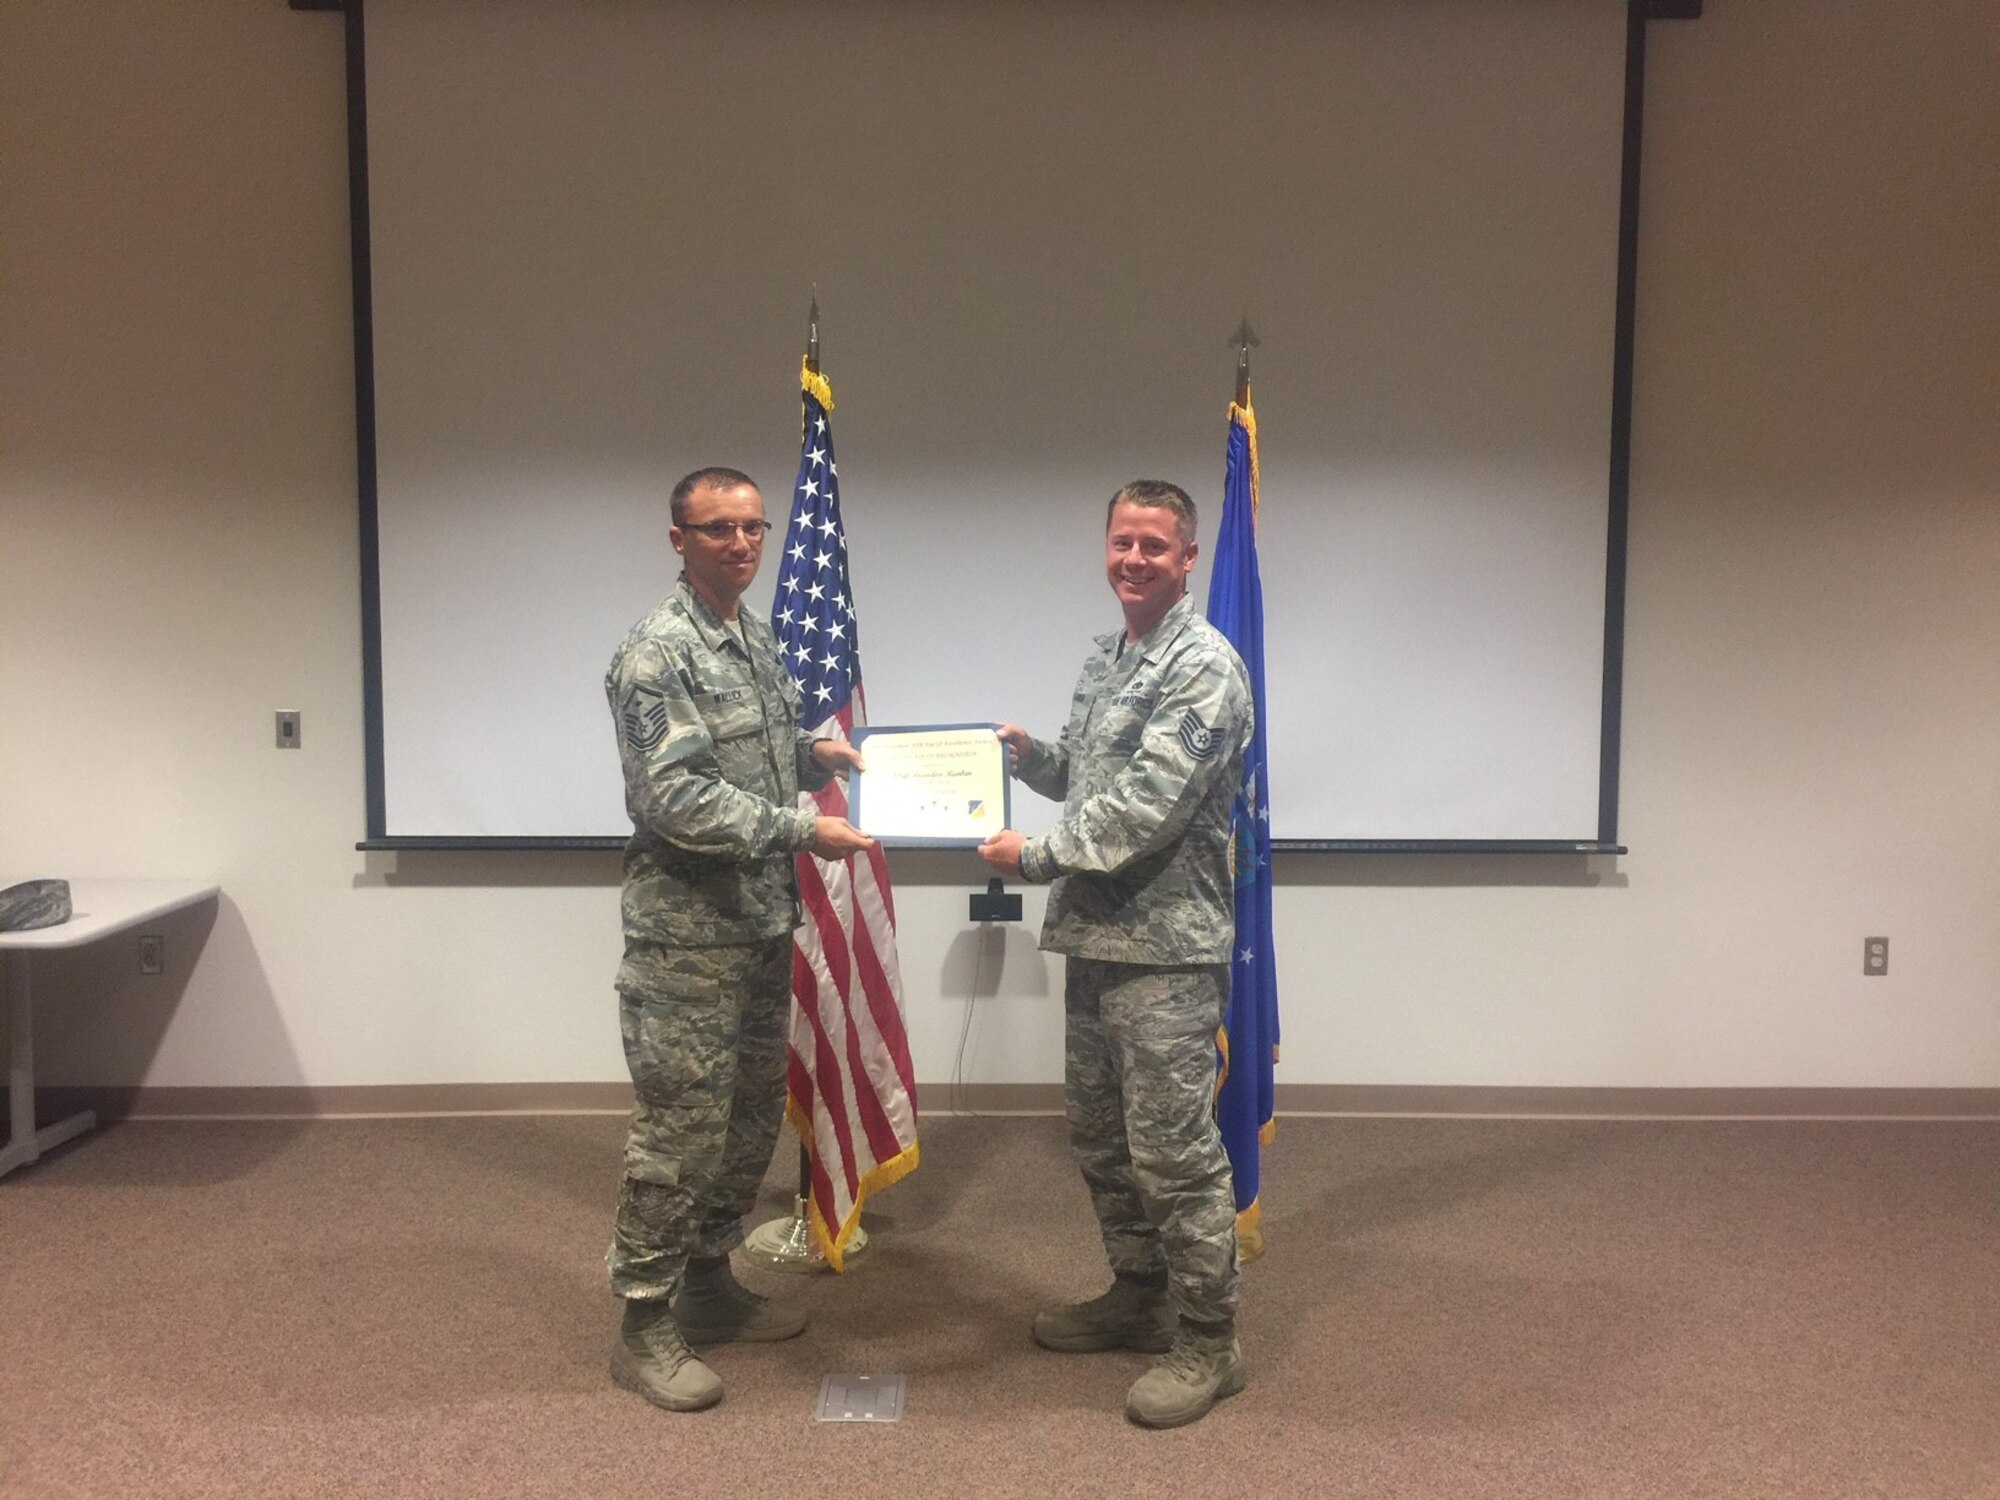 Tech. Sgt. Brandon Rankin, a 372nd Training Squadron, Detachment 10 technical training instructor, receives the June Top III noncommissioned officer award from Master Sgt. William Wallick, the 54th Aircraft Maintenance Squadron first sergeant, Aug. 2, 2017, at Holloman Air Force Base, N.M. During the month of June, Rankin accumulated 112 teaching hours over 14 days of instruction. His efforts led to the early graduation of eight students, sustaining manning requirements for six major commands. He became qualified to facilitate the new Airmanship 300 course for first term Airmen. (Courtesy photo)